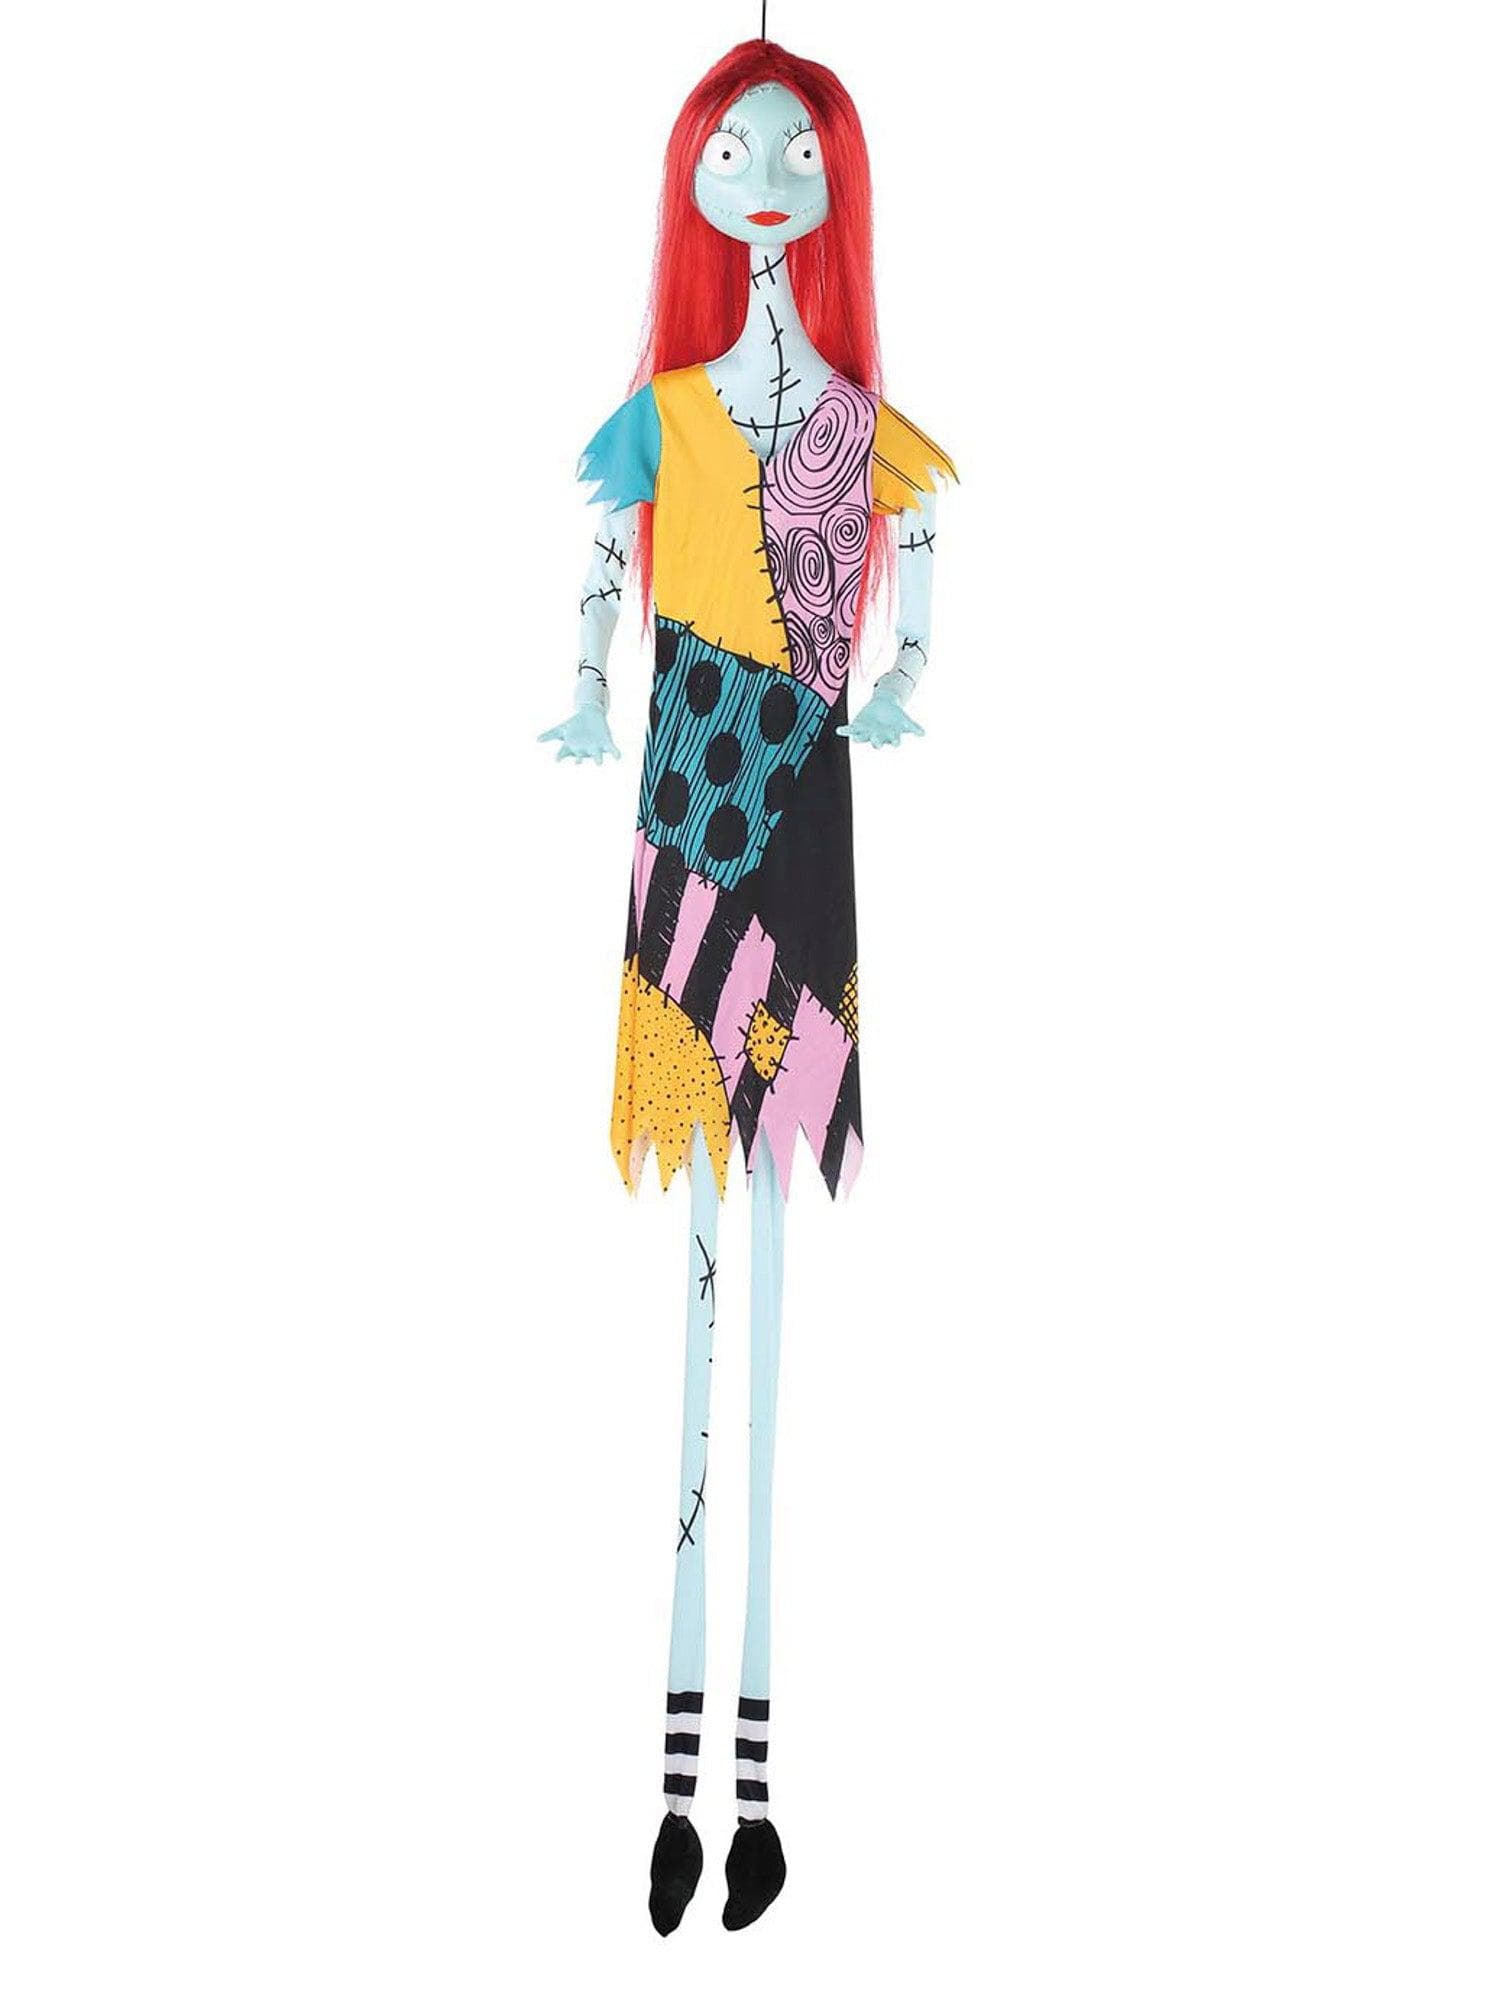 5 Foot The Nightmare Before Christmas Sally Poseable Character Prop - costumes.com